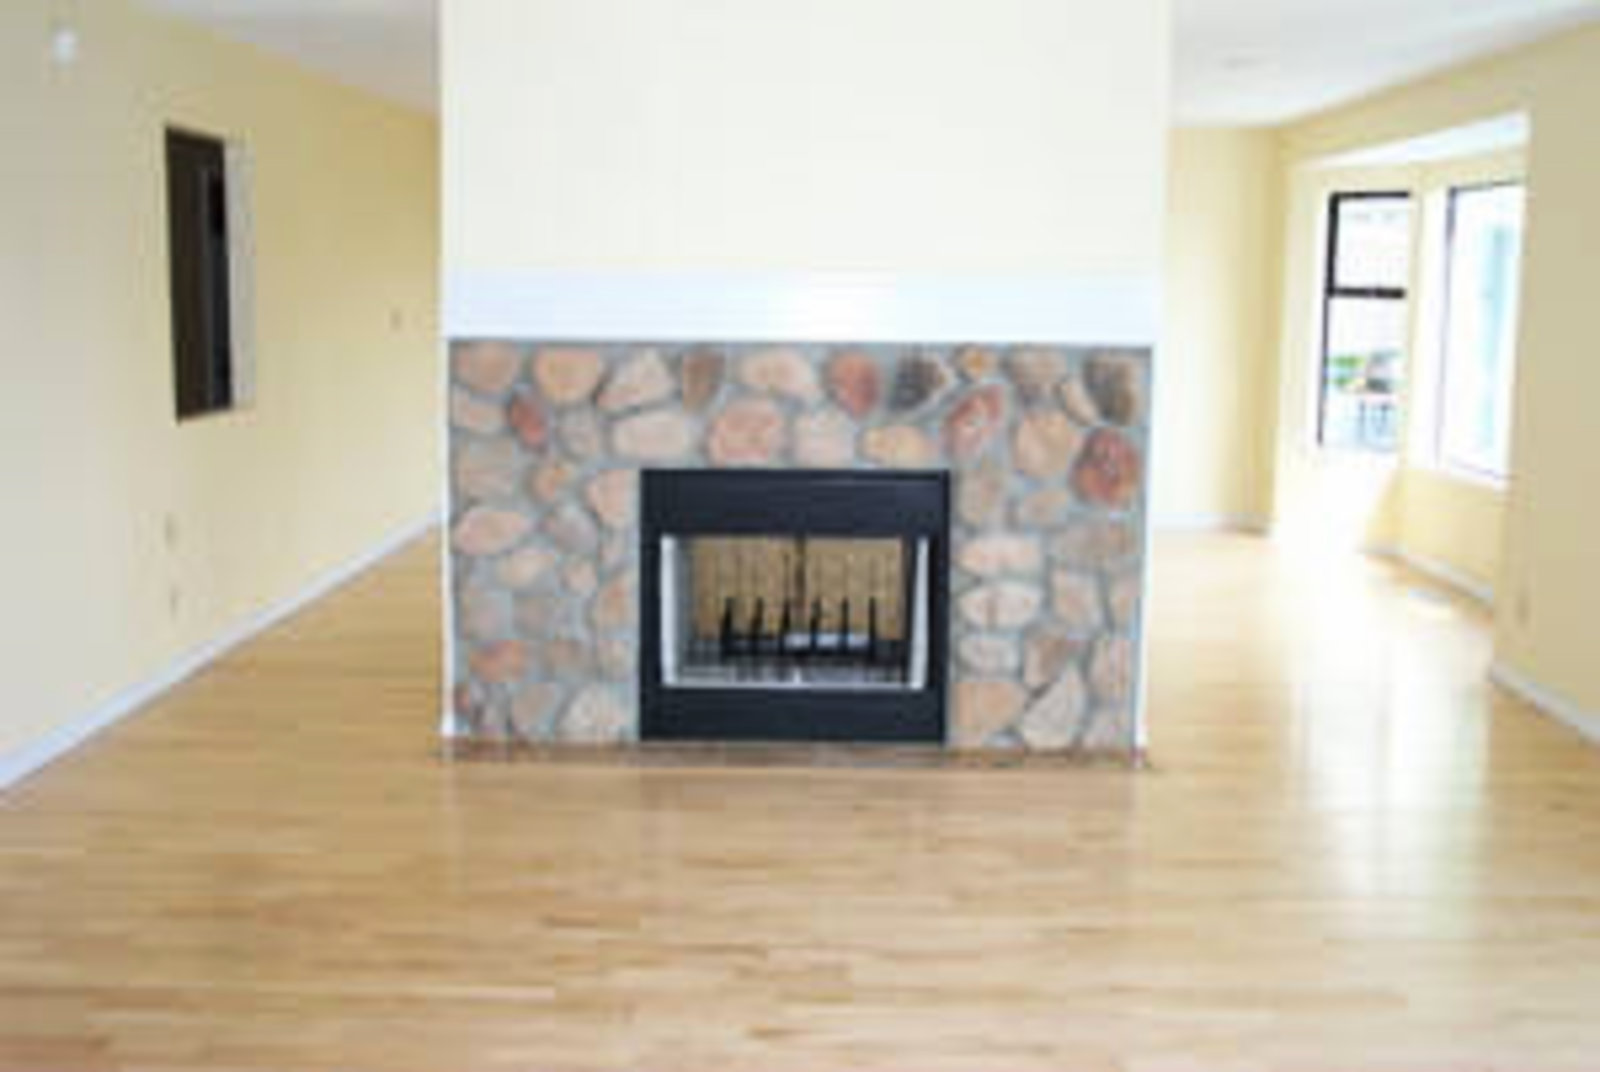 Family Room Connects with kitchen, birchwood floors, wood burning fireplace.